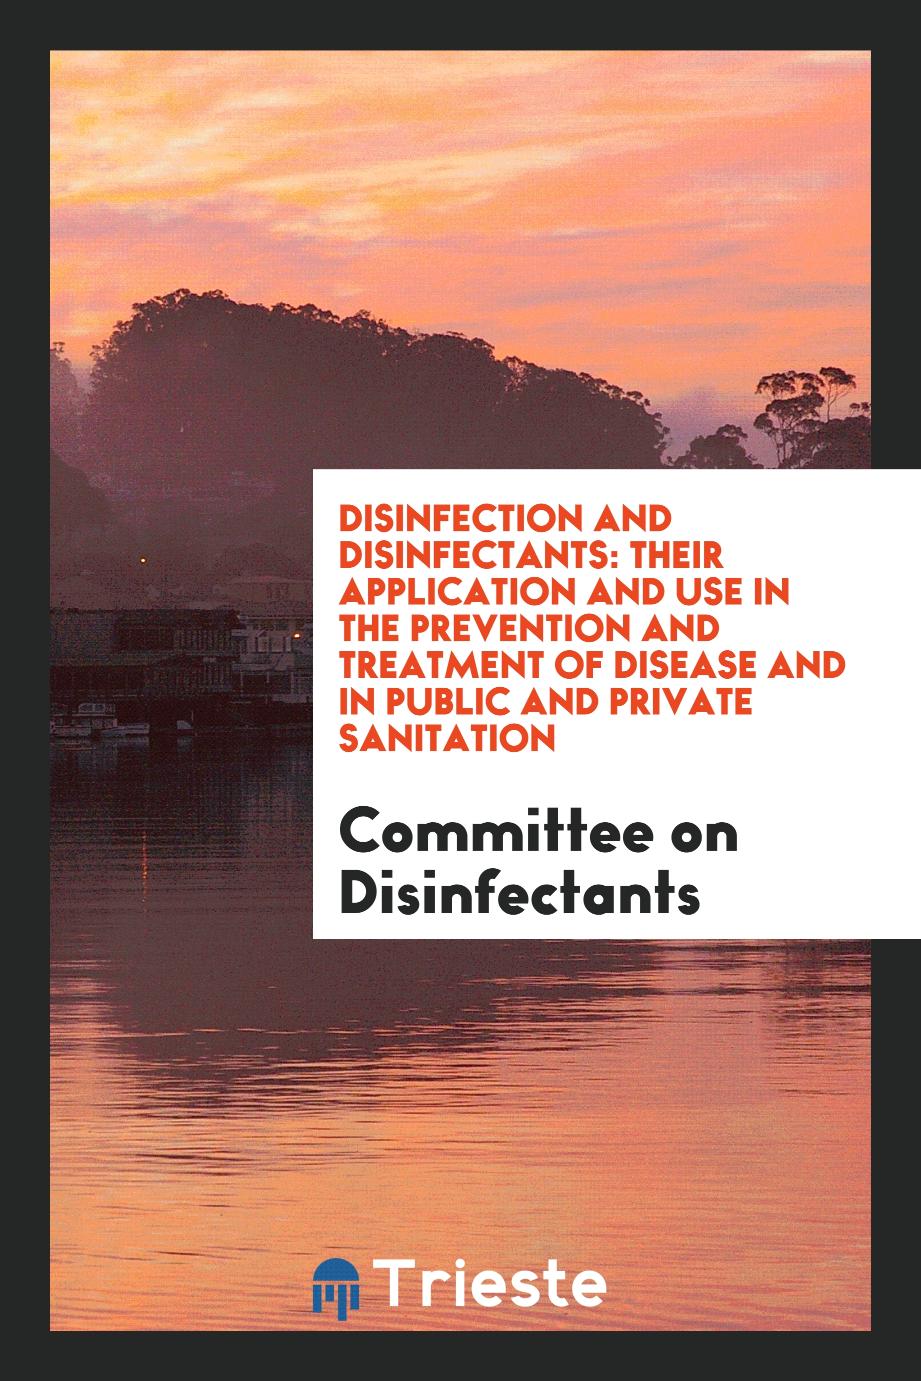 Disinfection and disinfectants: their application and use in the prevention and treatment of disease and in public and private sanitation